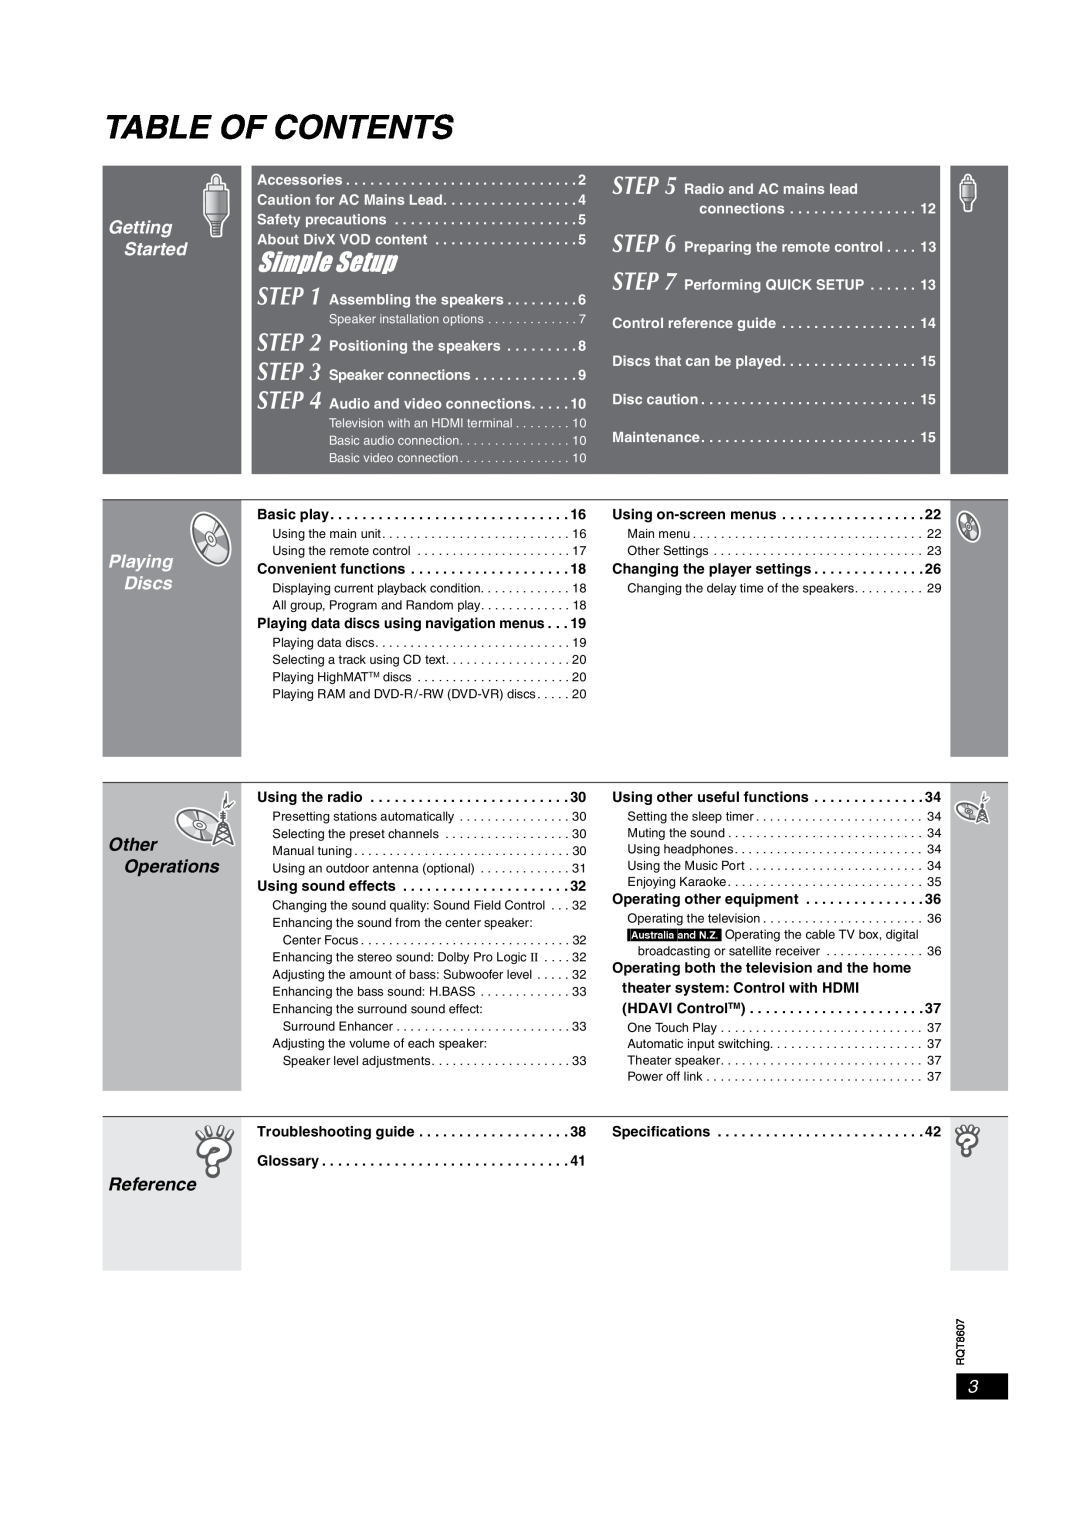 Panasonic SC-HT895 manual Getting, Started, Other Operations, Reference, HT895En.bookPage3 